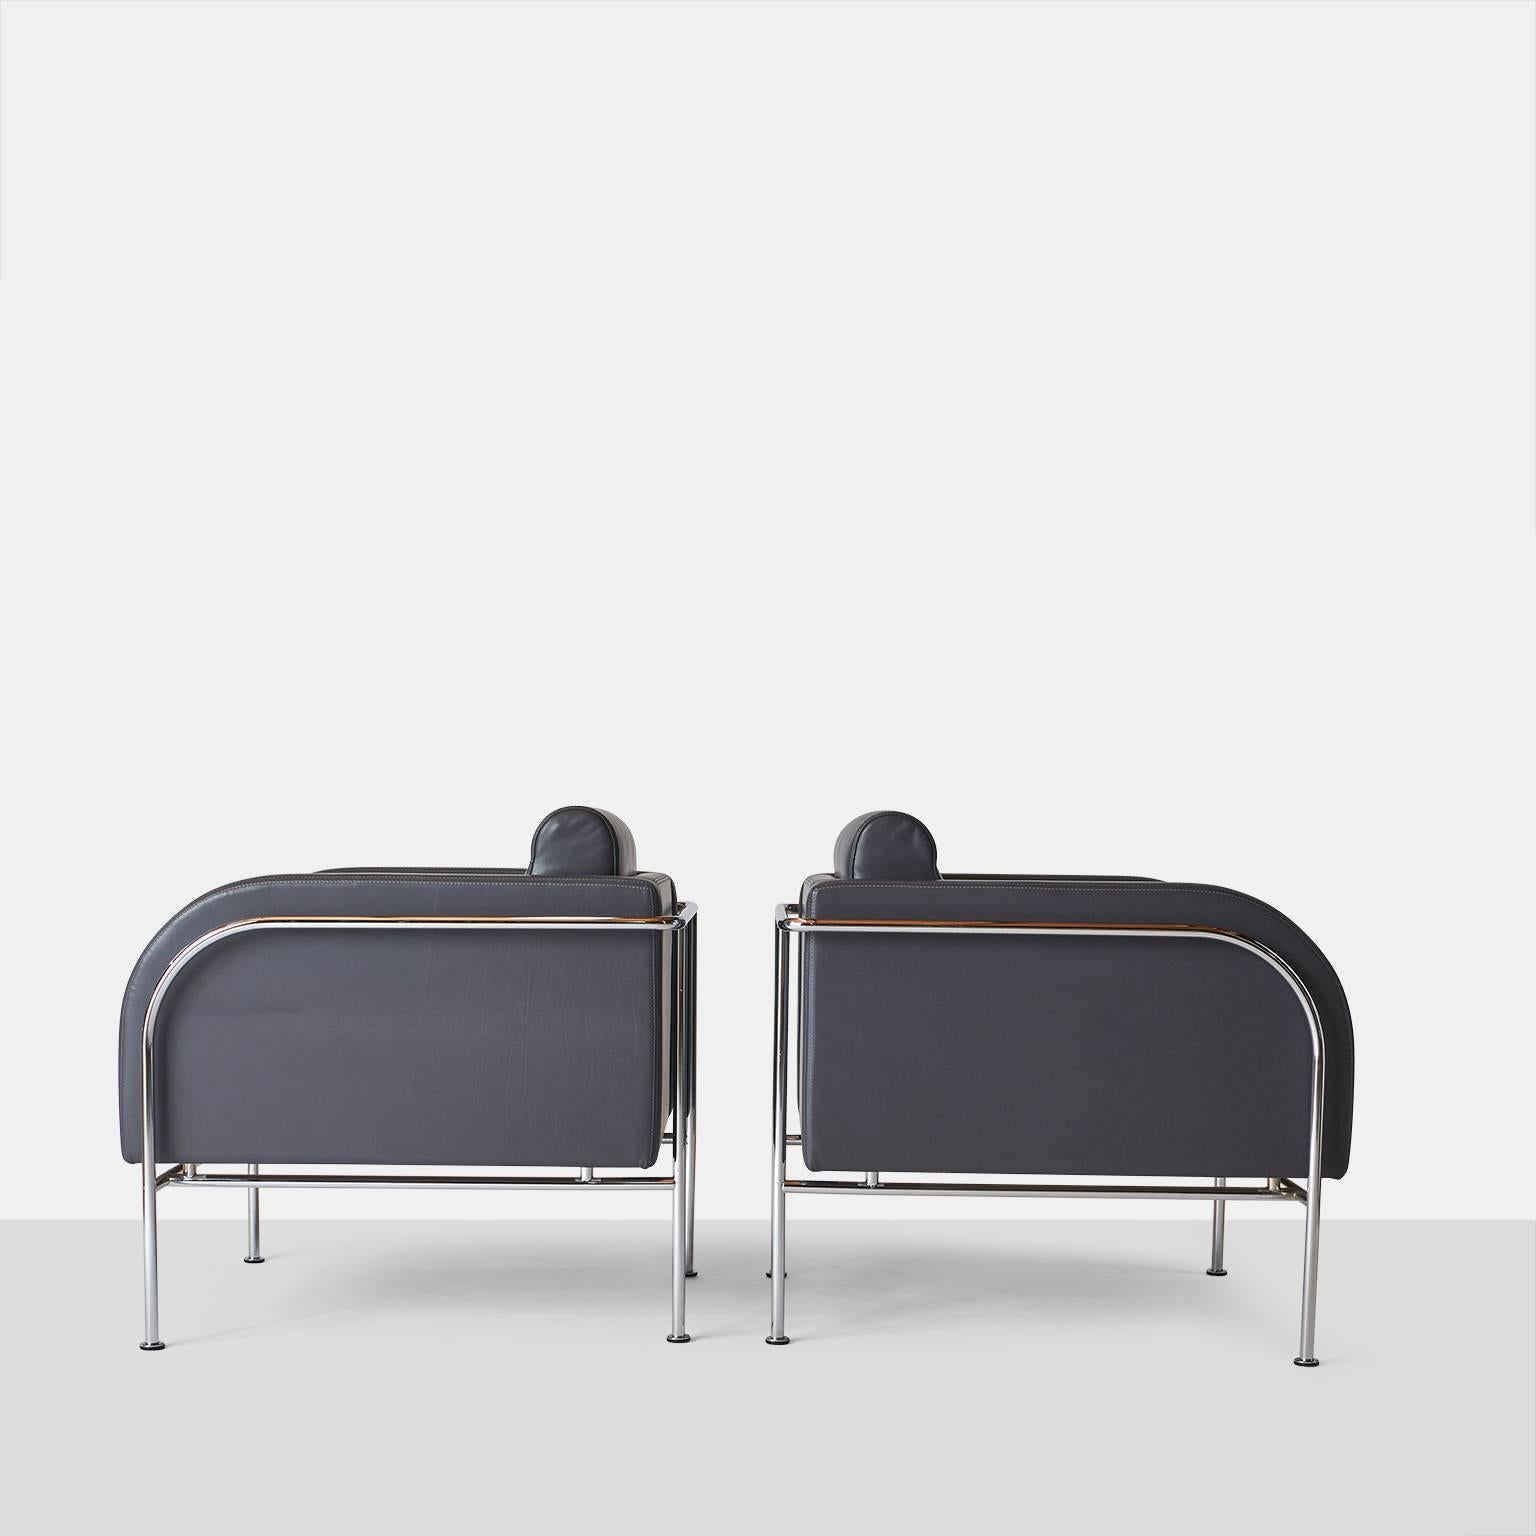 Pair of lounge chairs by Friis & Moltke.
A pair of curved arm lounge chairs for Randers Mobelfabrik. From the 'Series 2000 Lounge'. Chrome-plated tubular steel construction and upholstered in a grey leather. The chairs were designed by the Danish